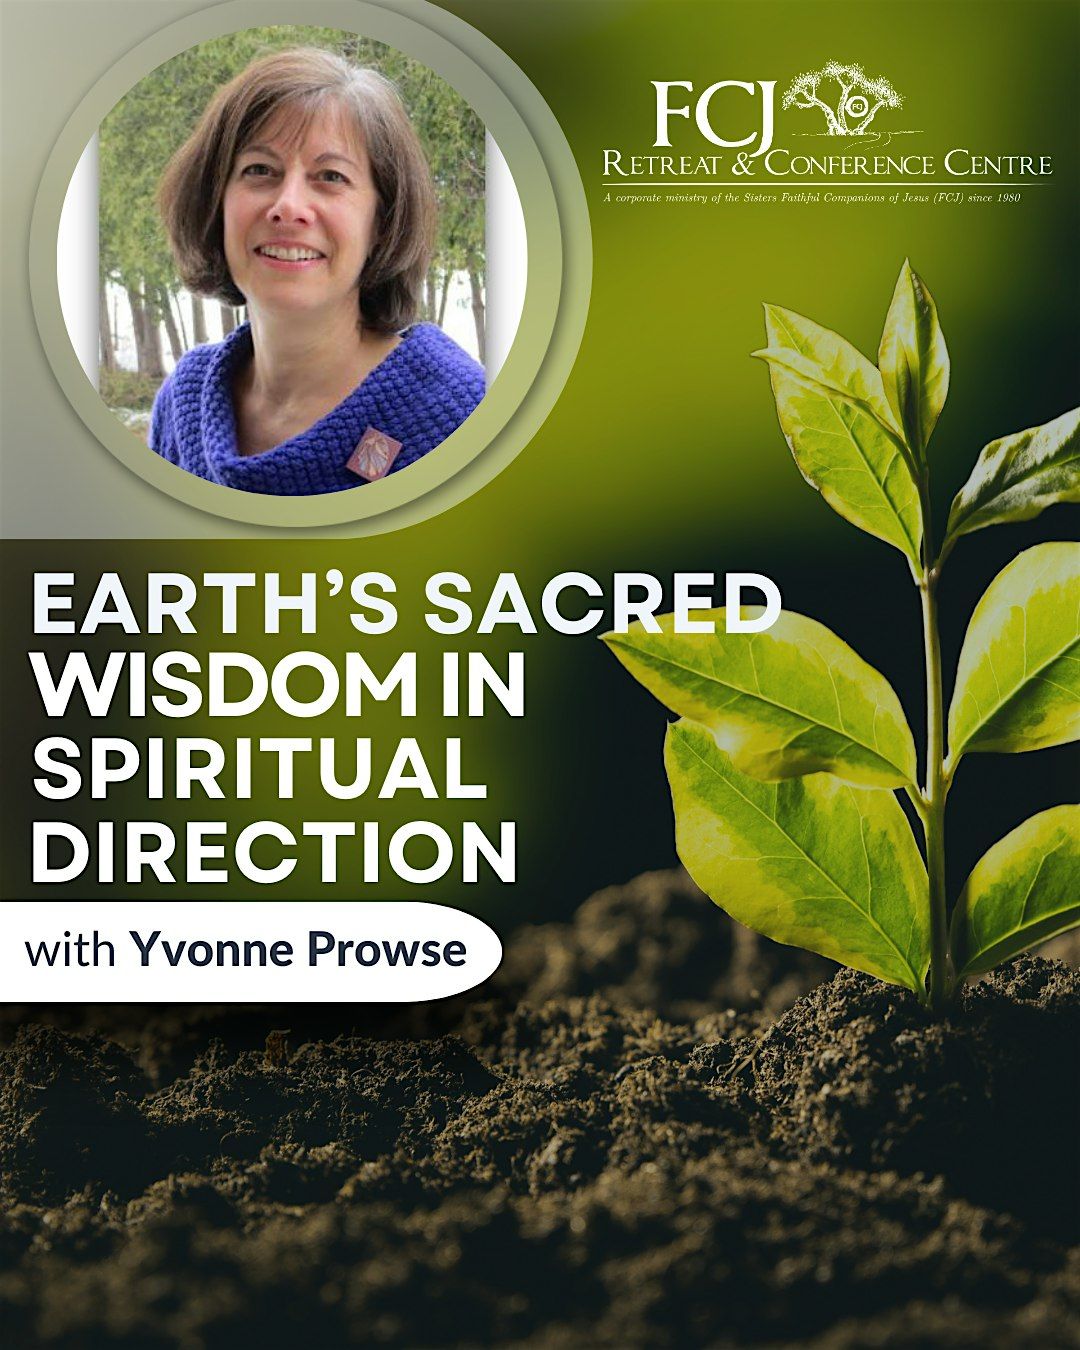 Earth's Sacred Wisdom in Spiritual Direction with Yvonne Prowse